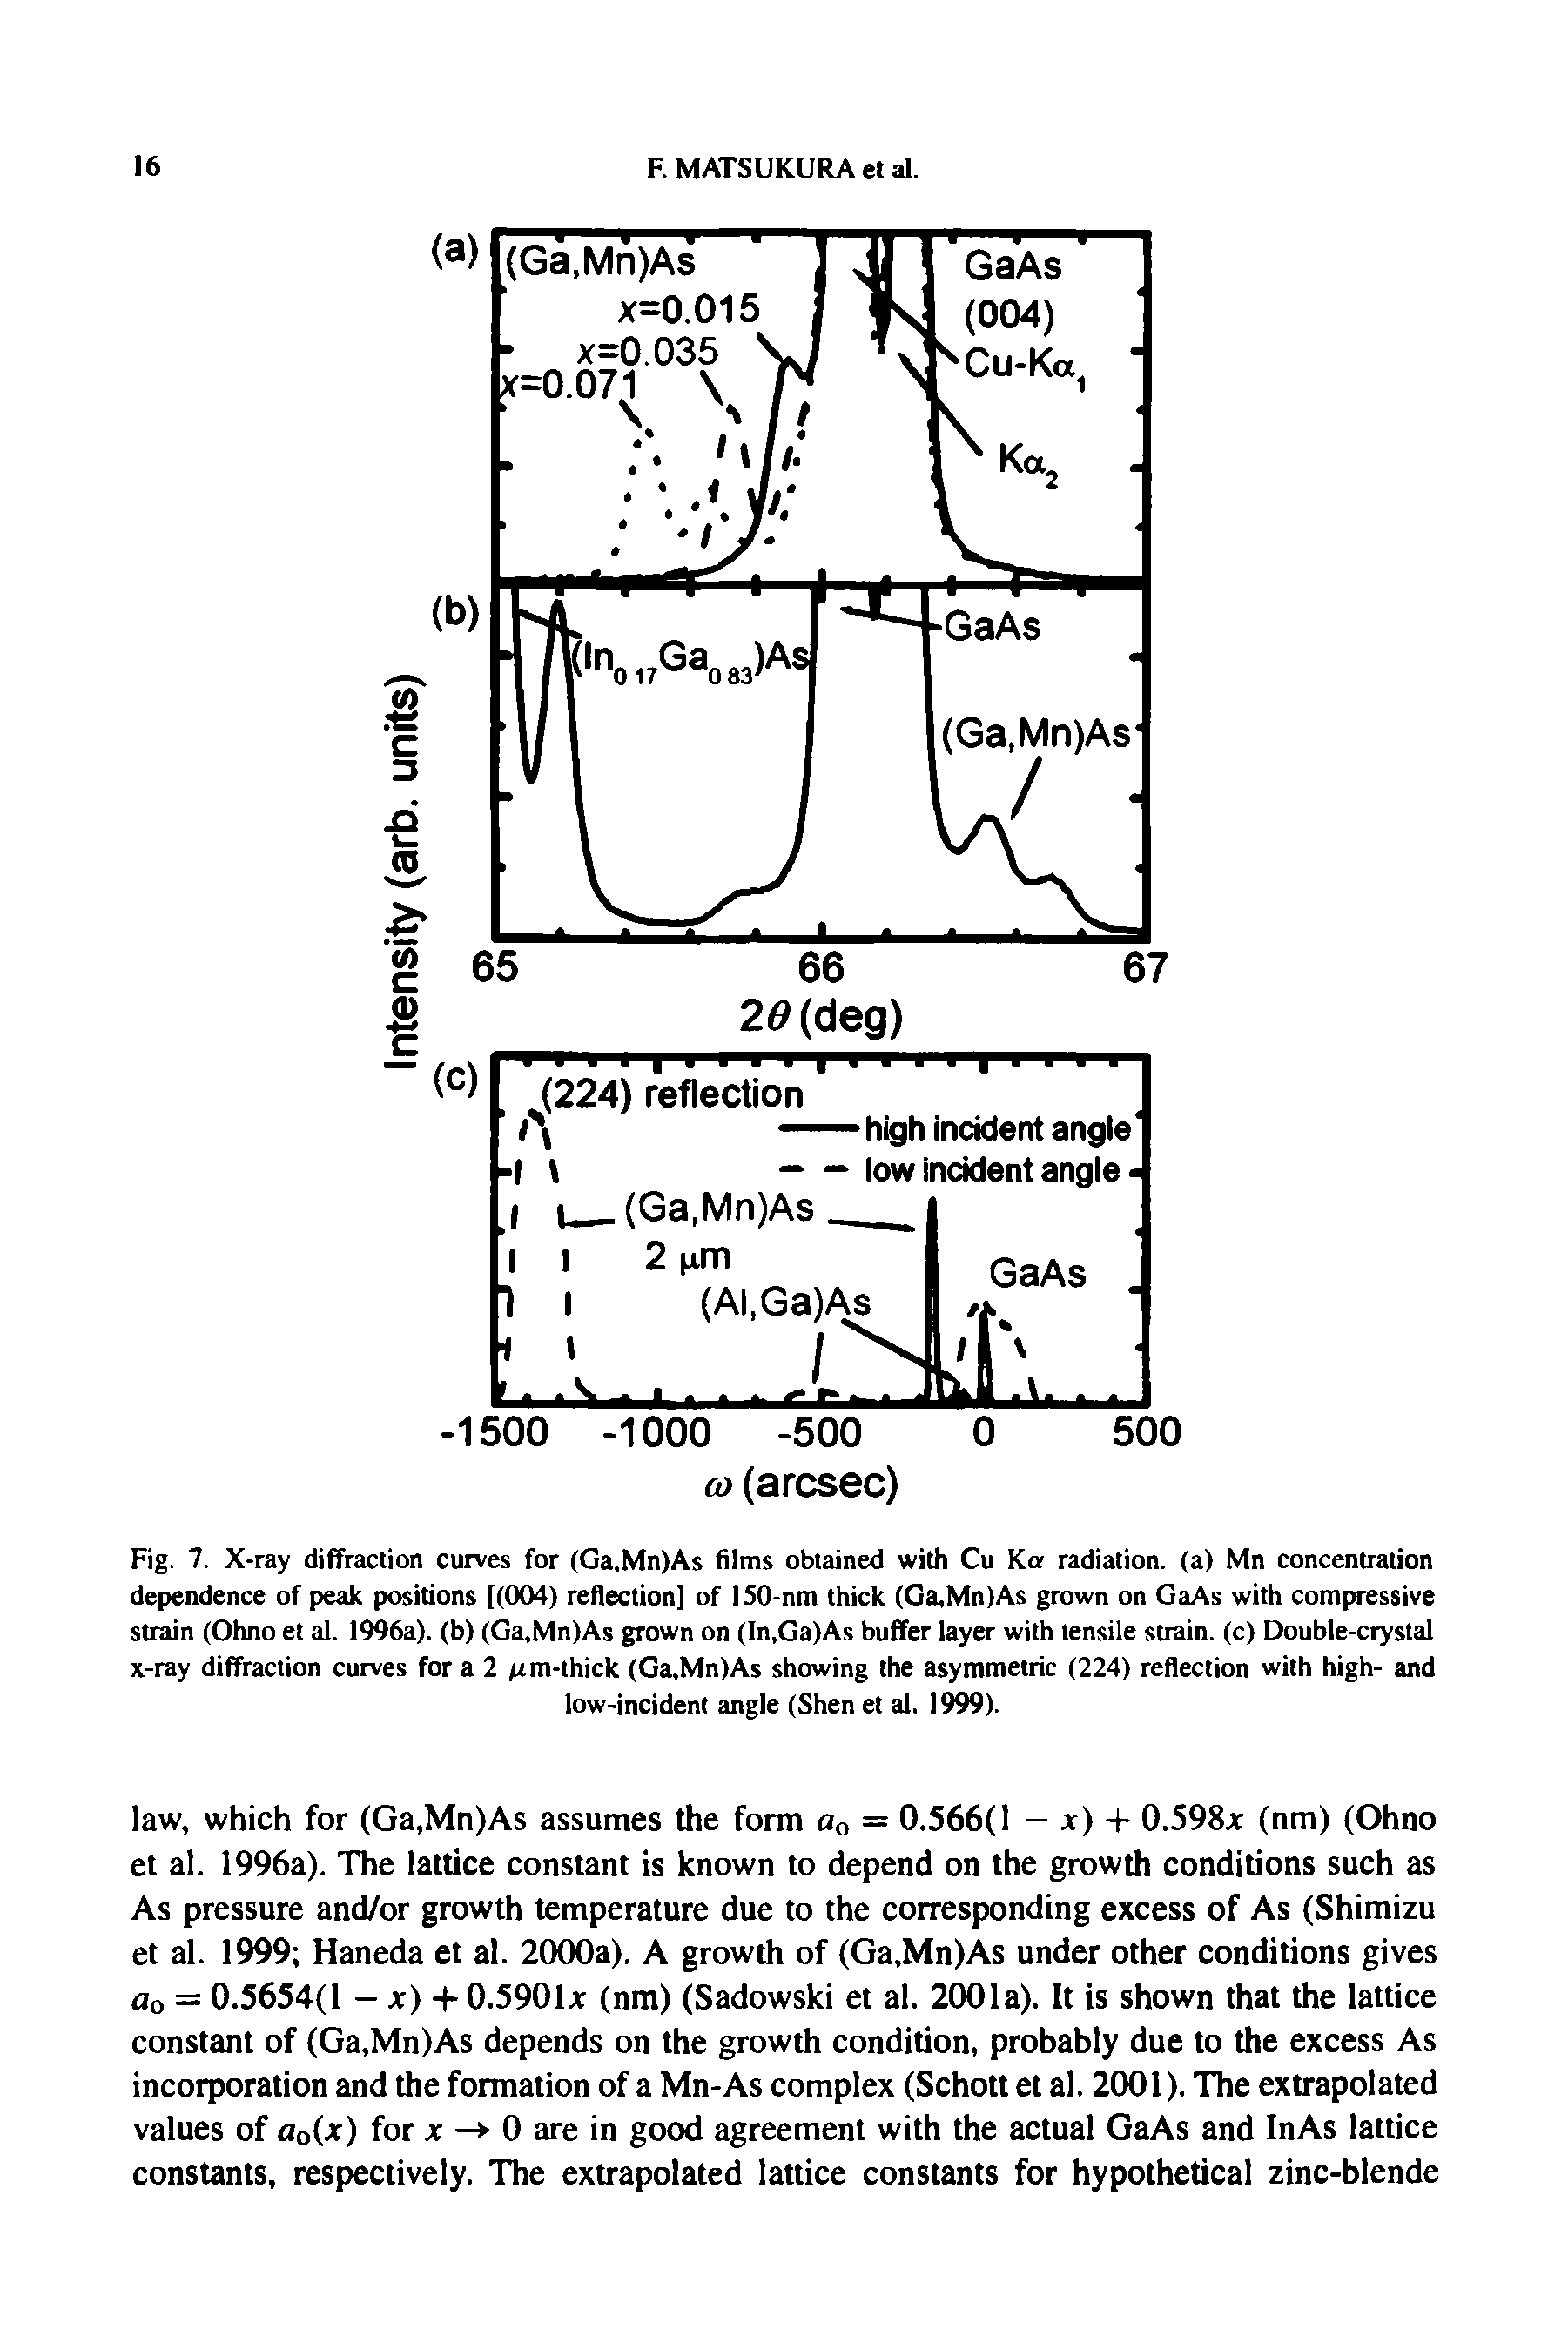 Fig. 7. X-ray diffraction curves for (Ga,Mn)As films obtained with Cu Kor radiation, (a) Mn concentration dependence of peak positions [(004) reflection] of ISO-nm thick (Ga,Mn)As grown on GaAs with compressive strain (Ohno et al. 1996a). (b) (Ga,Mn)As grown on (In.Ga)As buffer layer with tensile strain, (c) Double-crystal x-ray diffraction curves for a 2 /rm-thick (Ga,Mn)As showing the asymmetric (224) reflection with high- and...